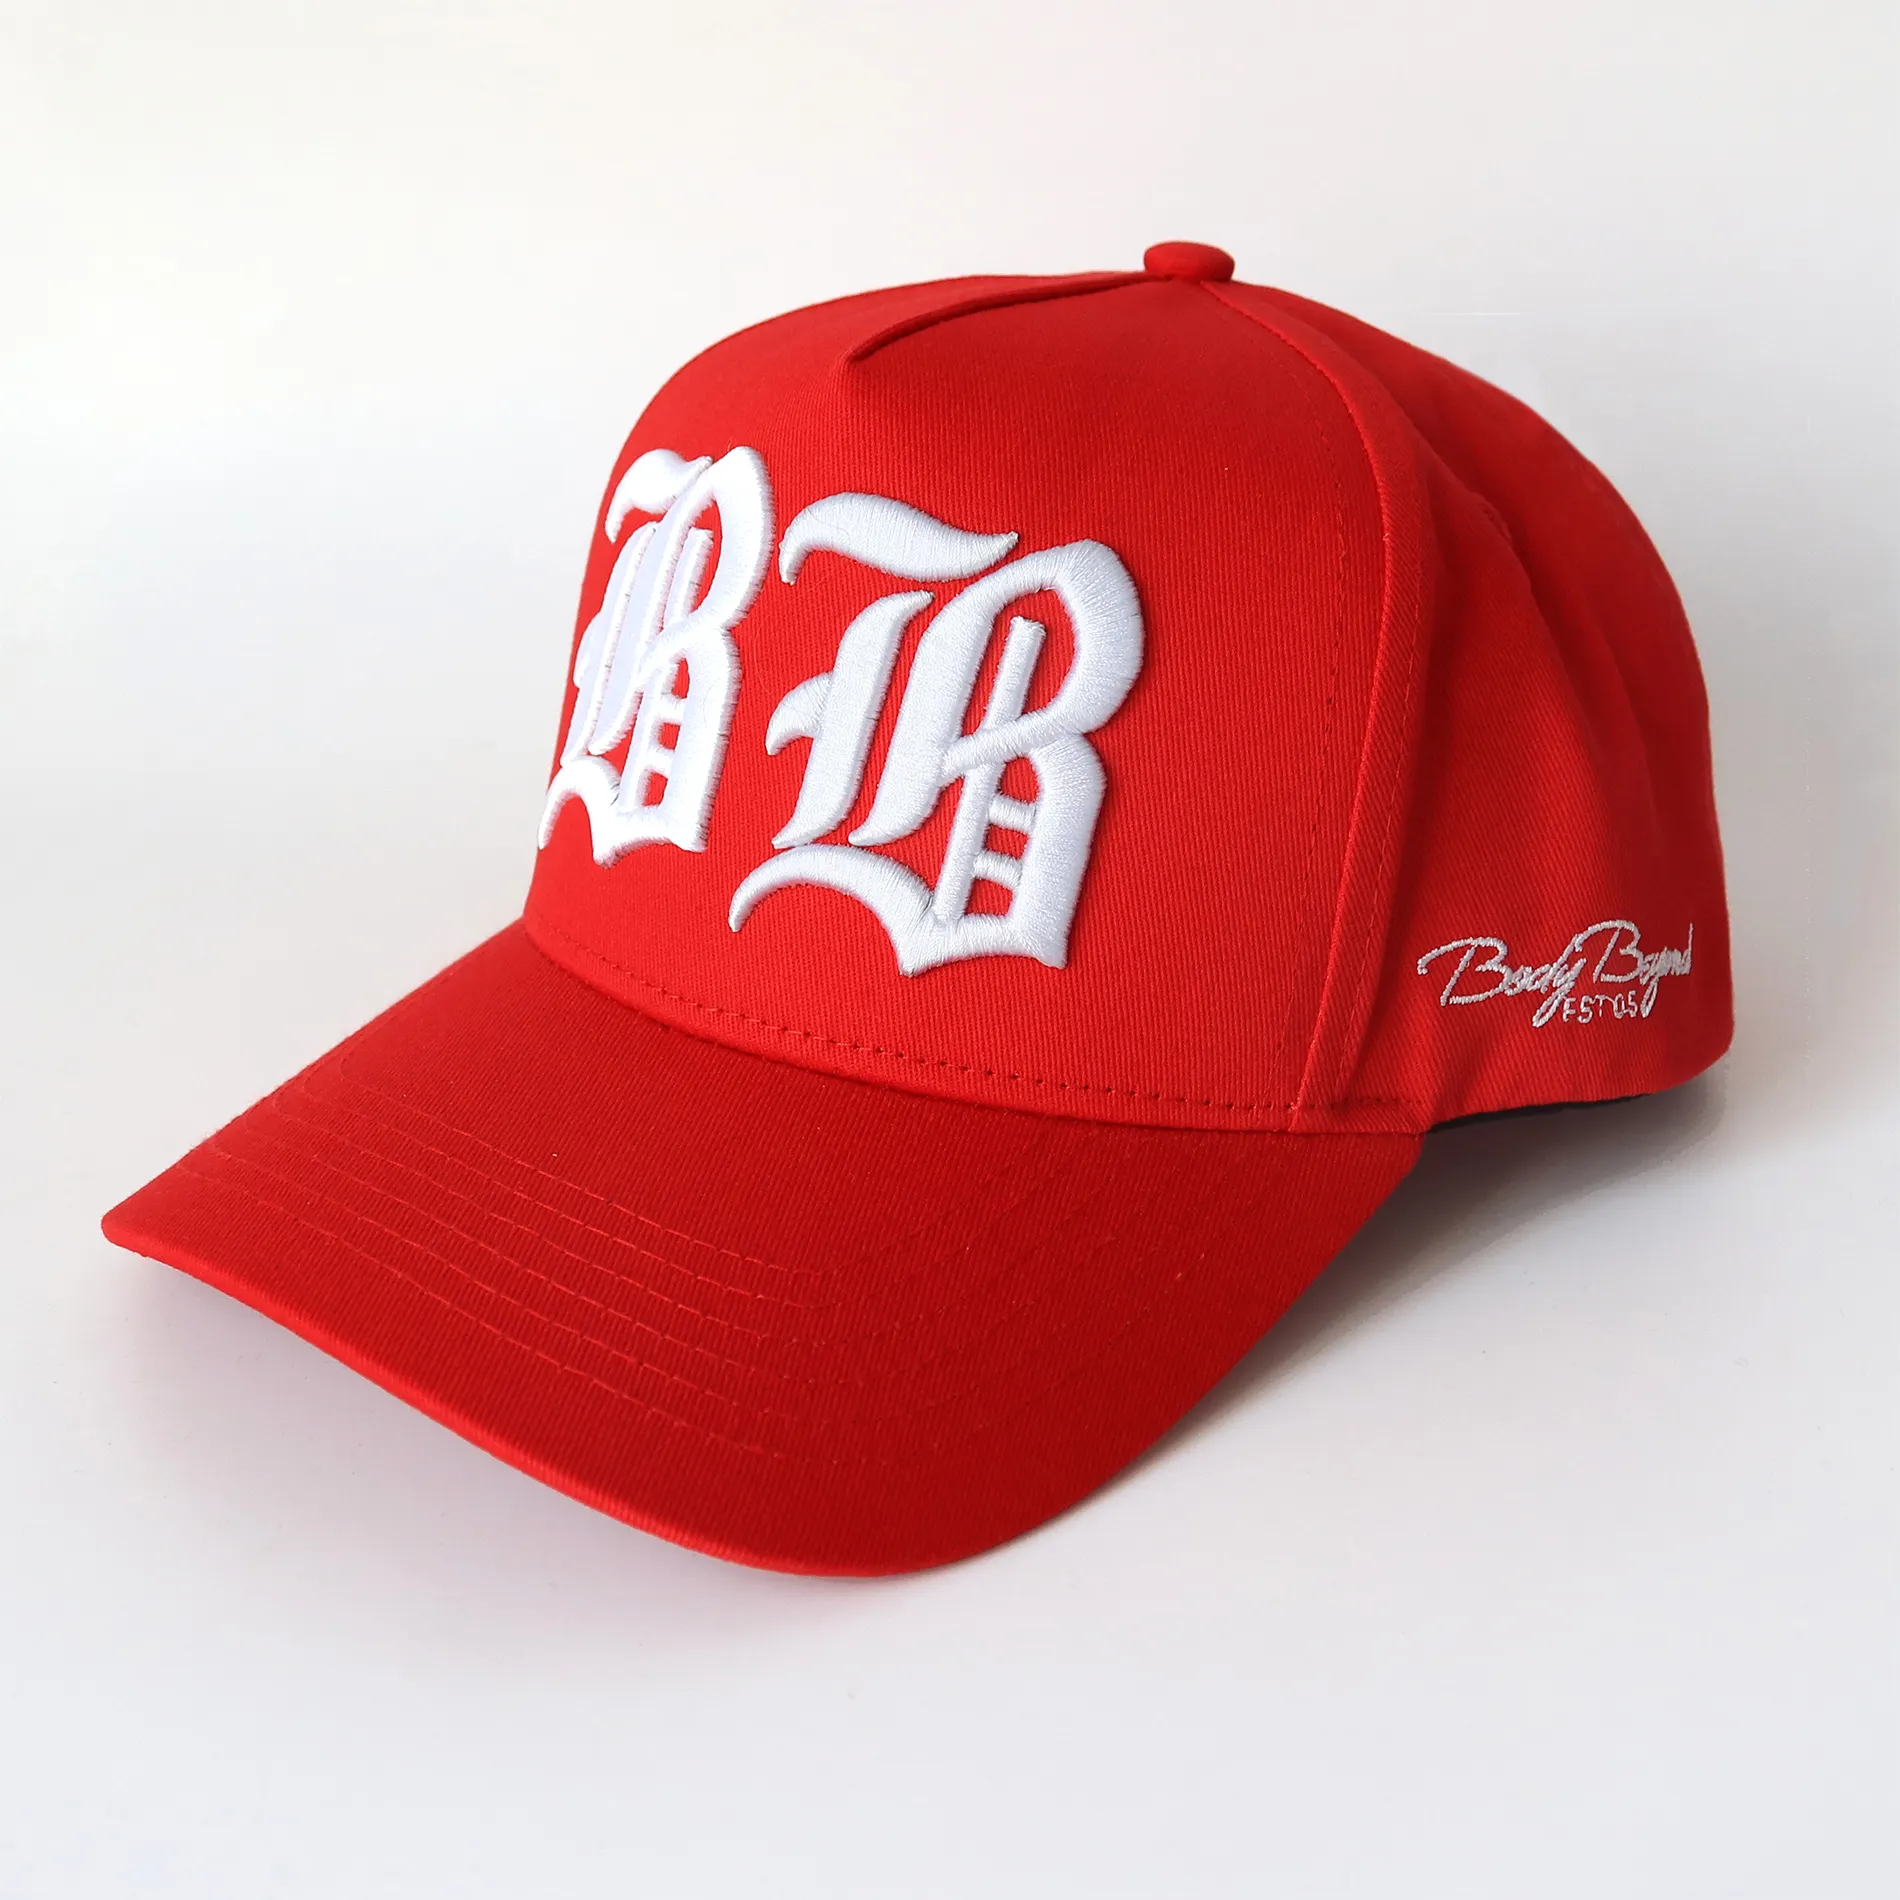 Professional custom made 3D embroidery LOGO cotton twill 5 panel A Frame structured red color sports baseball cap and hat